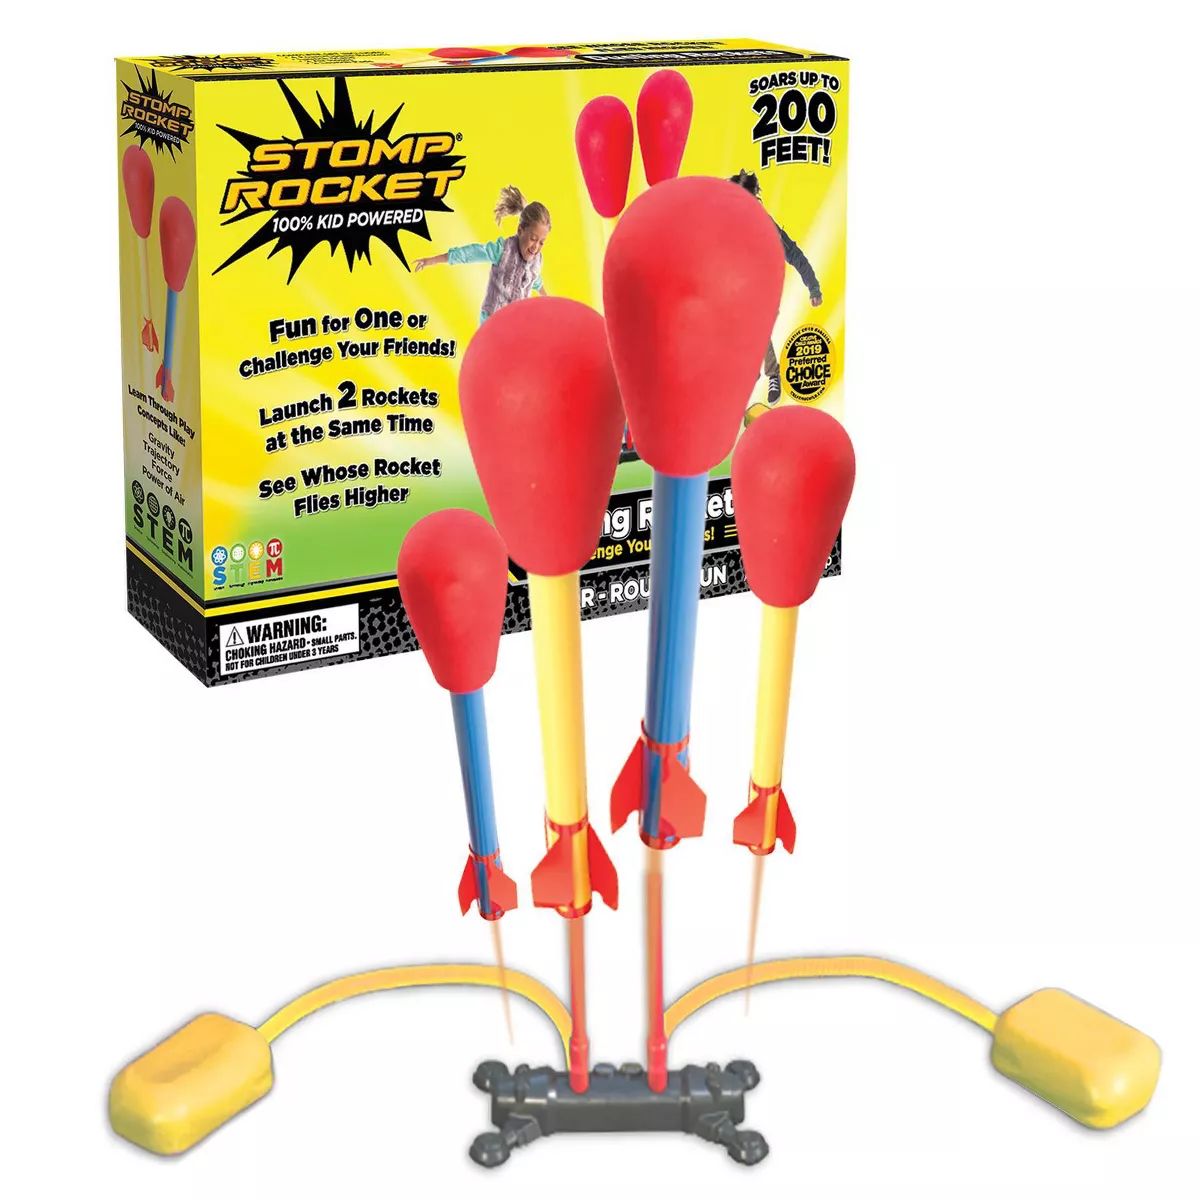 Stomp Rocket Dueling High-Flying Toy Rocket Double Launch Set | Target